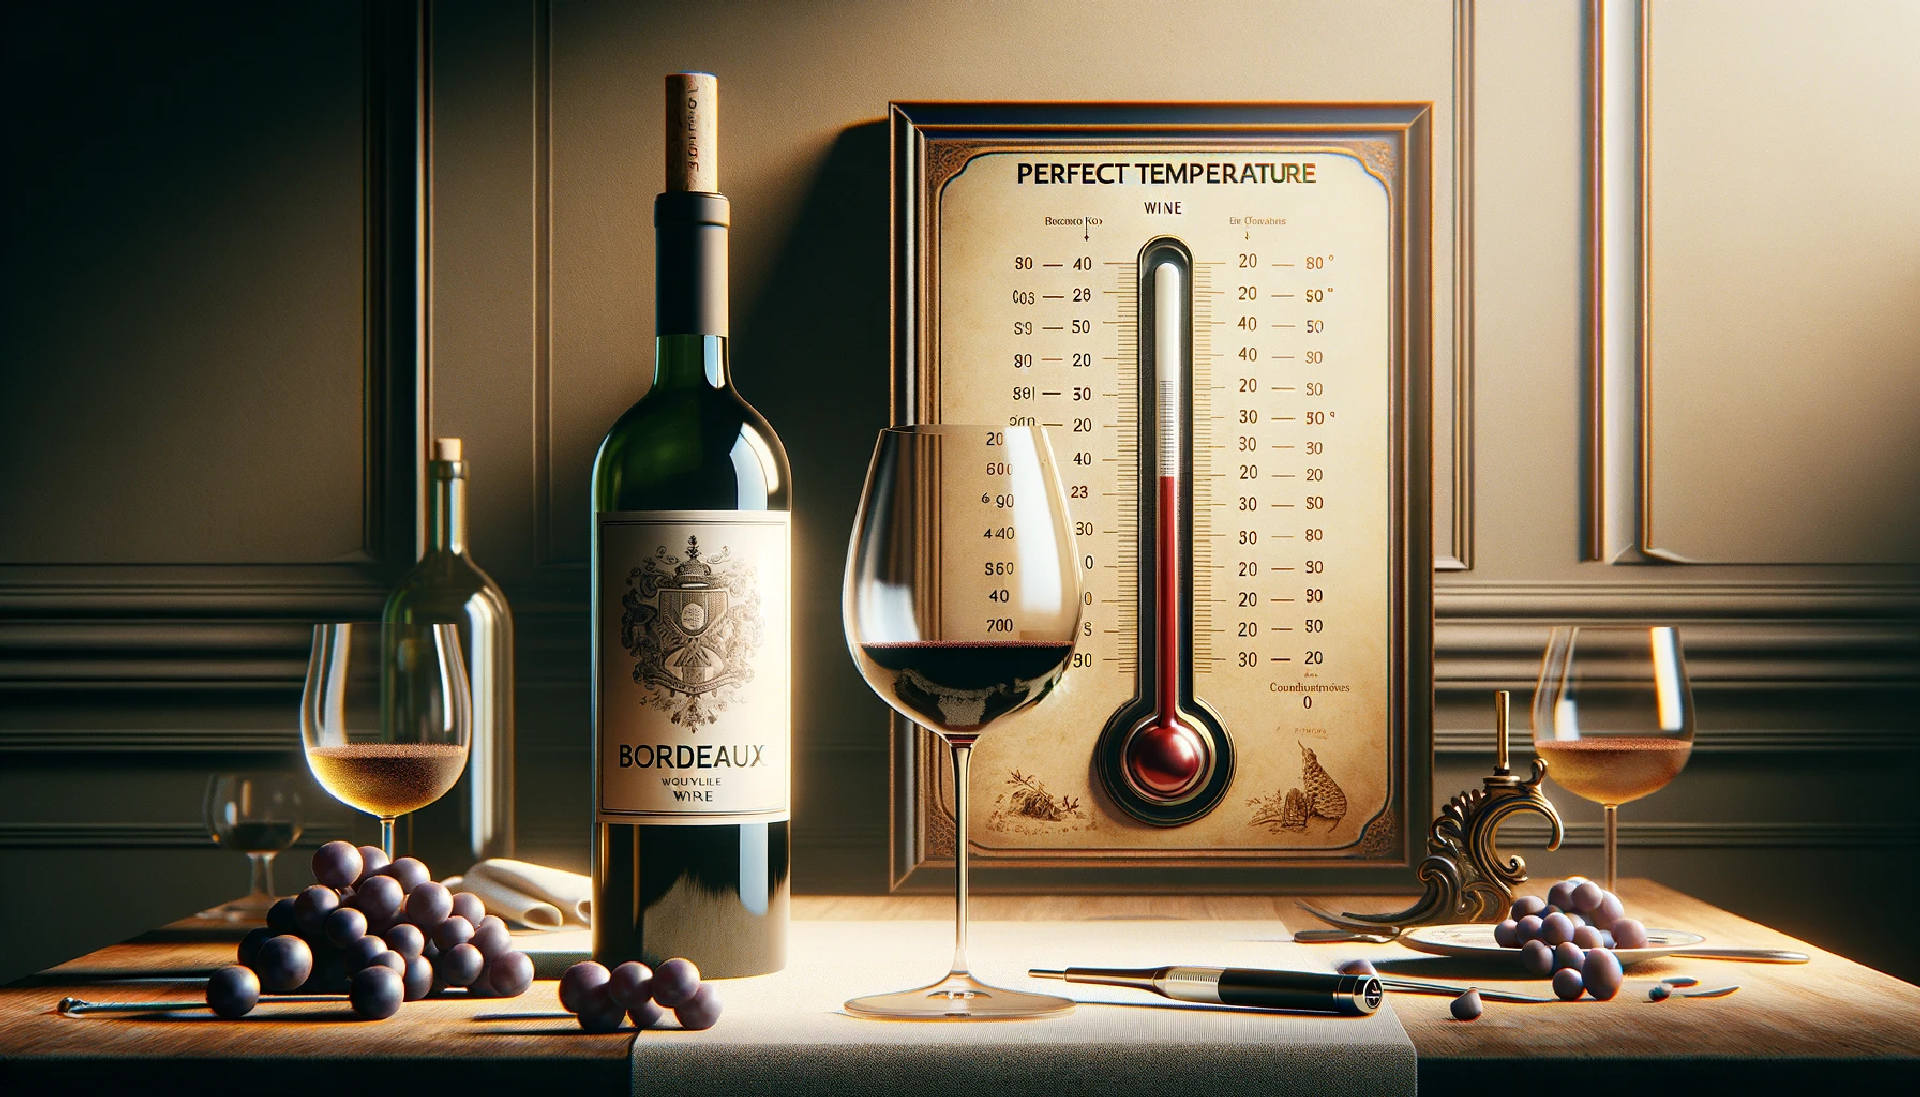 How to serve Bordeaux Wine - The Perfect Temperature for Bordeaux Wine